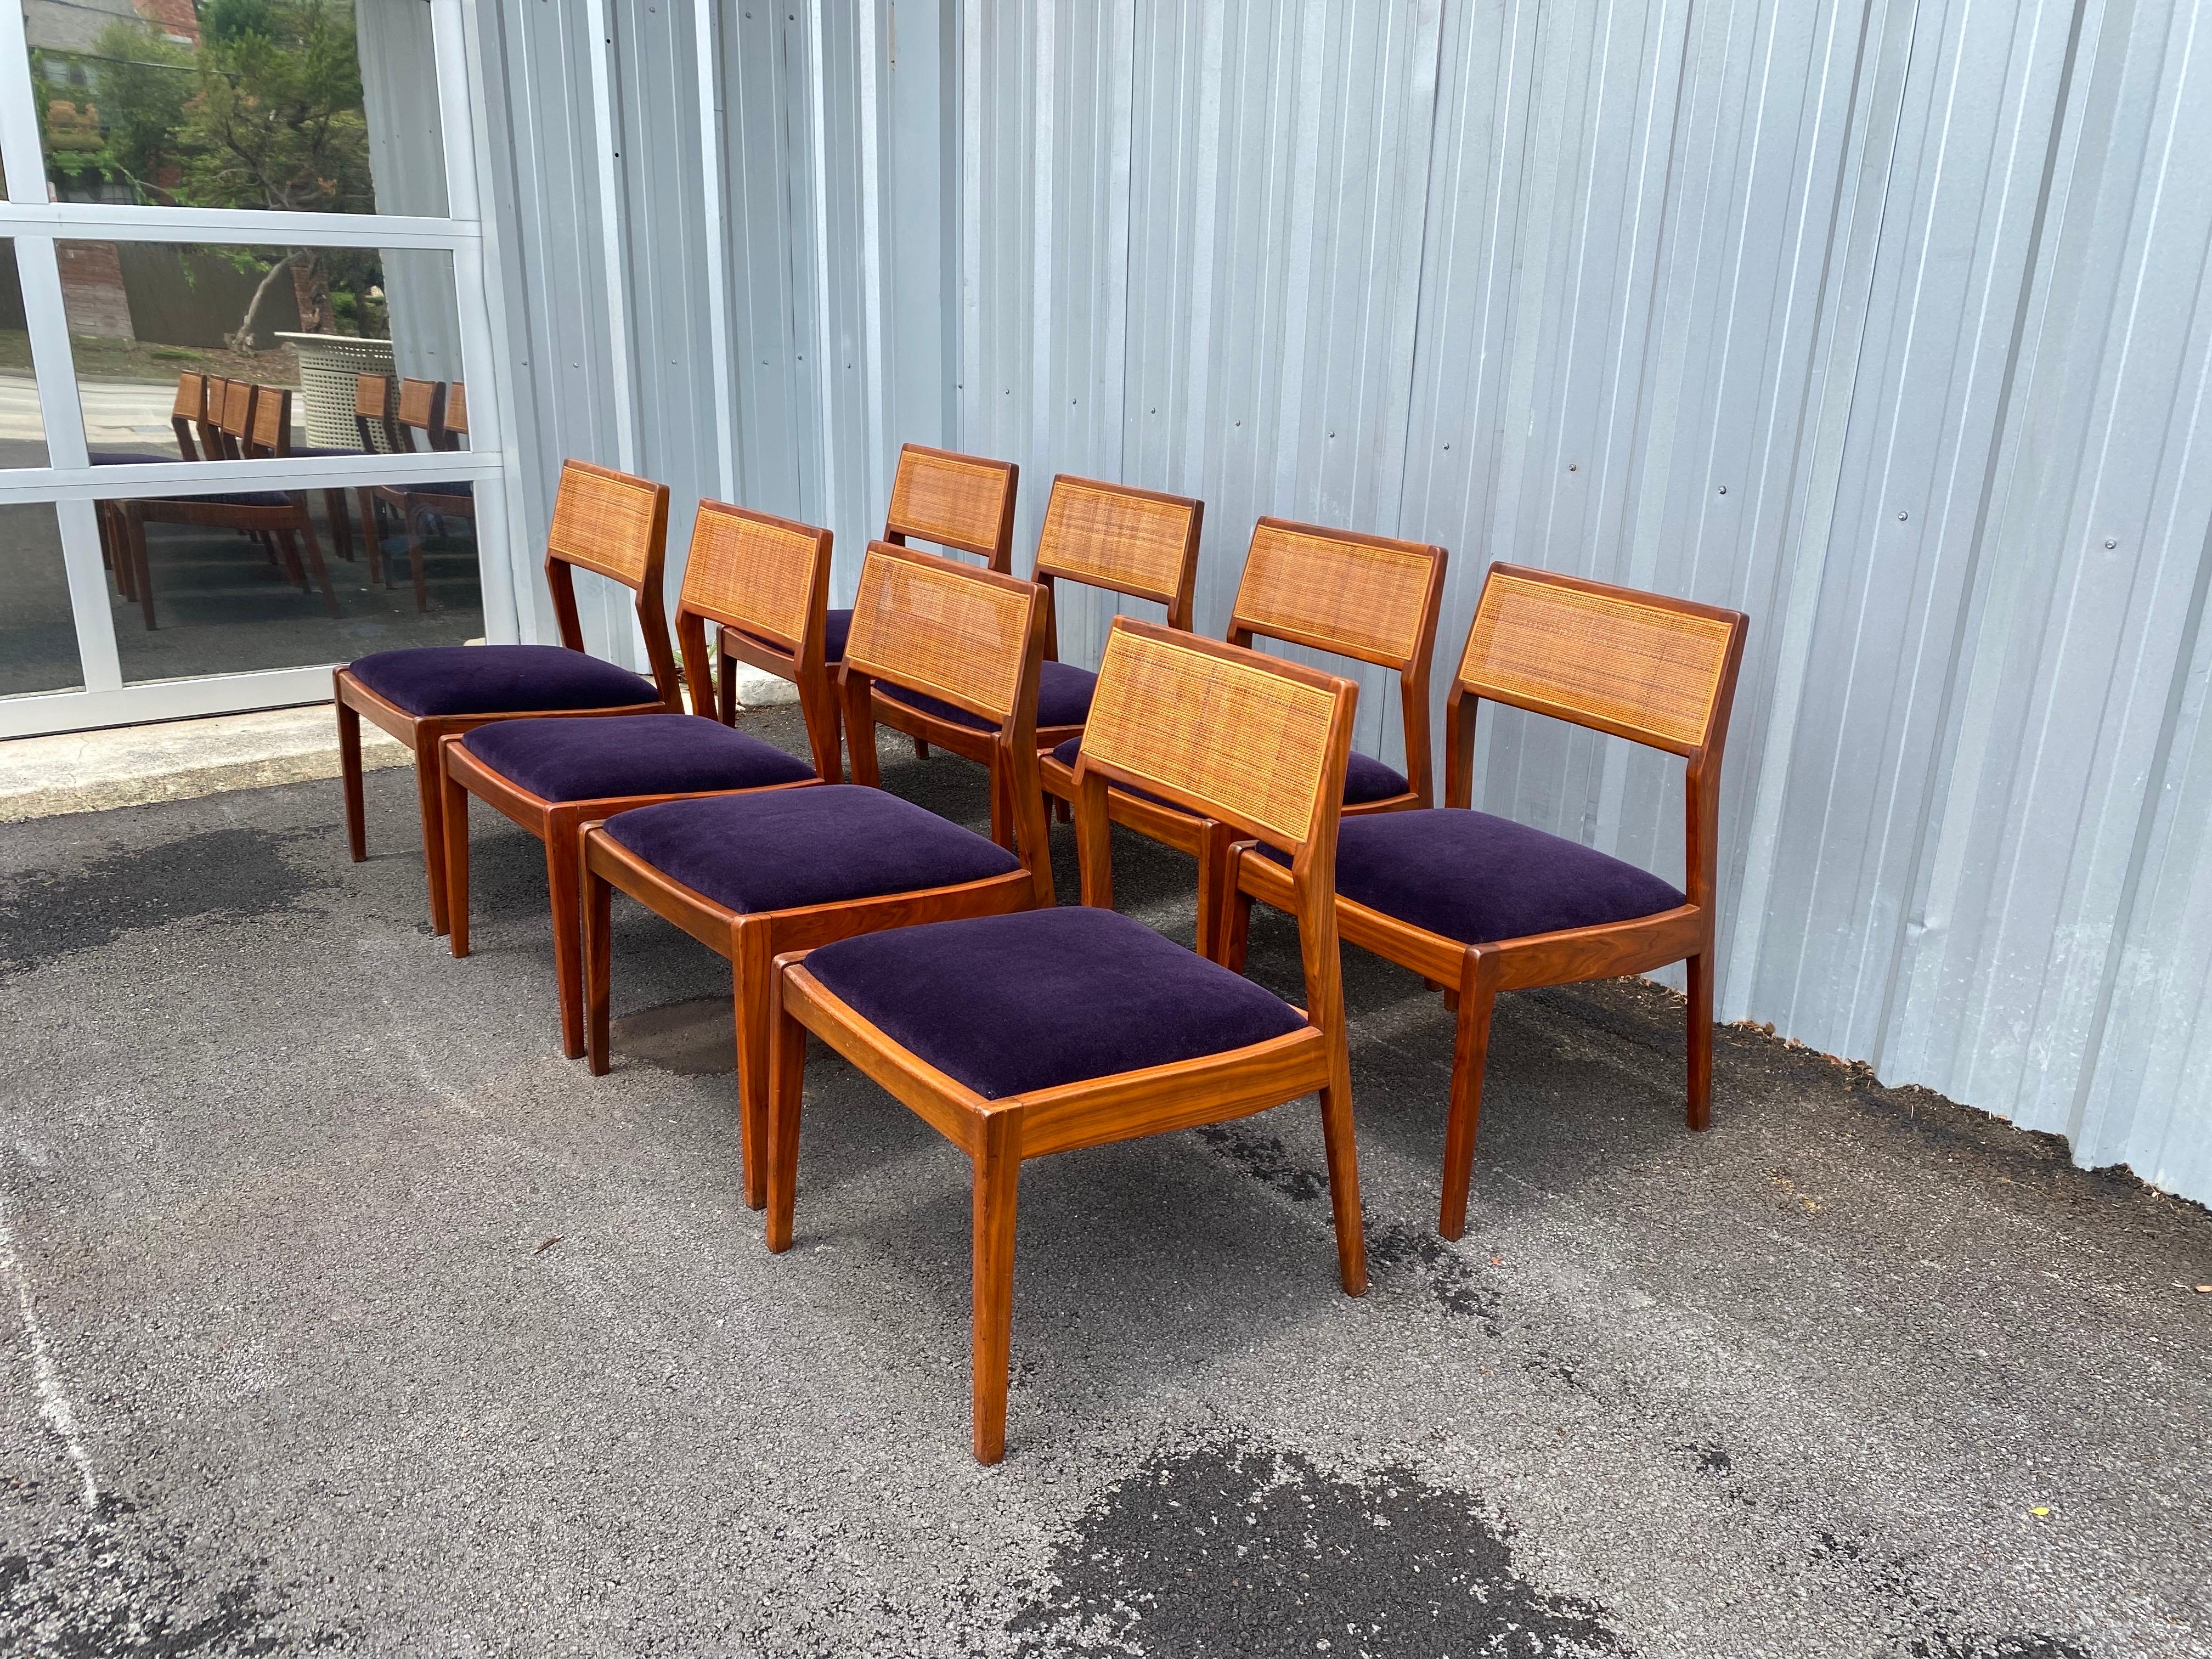 Beautiful set of 8 mid-century modern dining chairs by Foster-McDavid with a caned back and is made of walnut. The dining chairs have been newly reupholstered with a very fine aubergine mohair fabric. Normal age-appropriate wear on one chair located